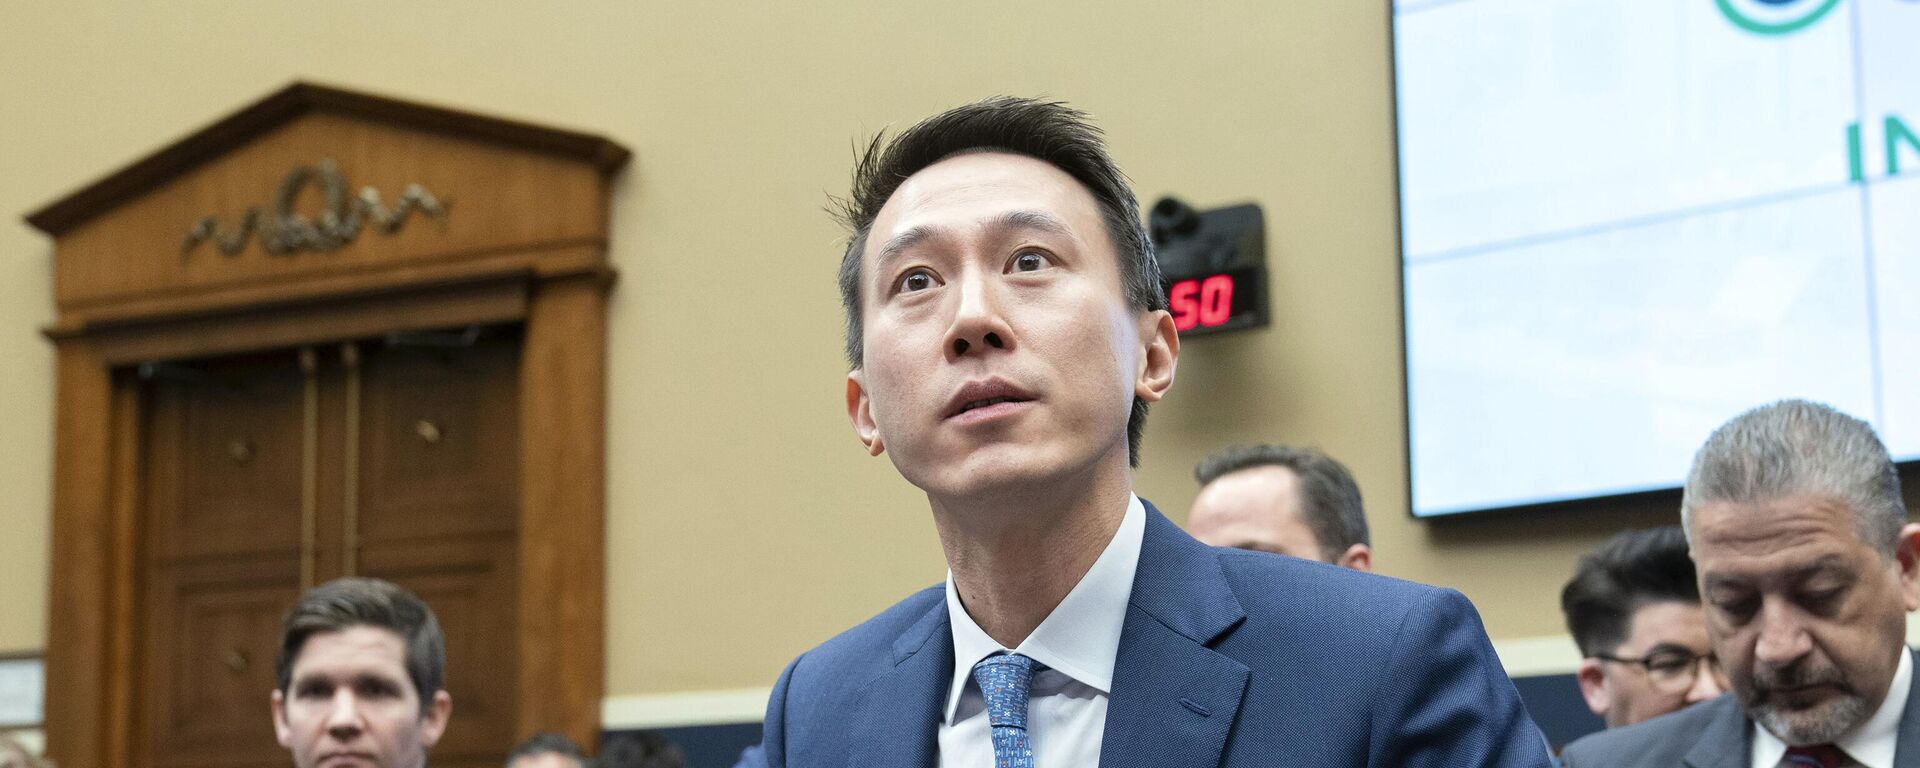 TikTok CEO Shou Zi Chew testifies during a hearing of the House Energy and Commerce Committee - Sputnik International, 1920, 24.03.2023